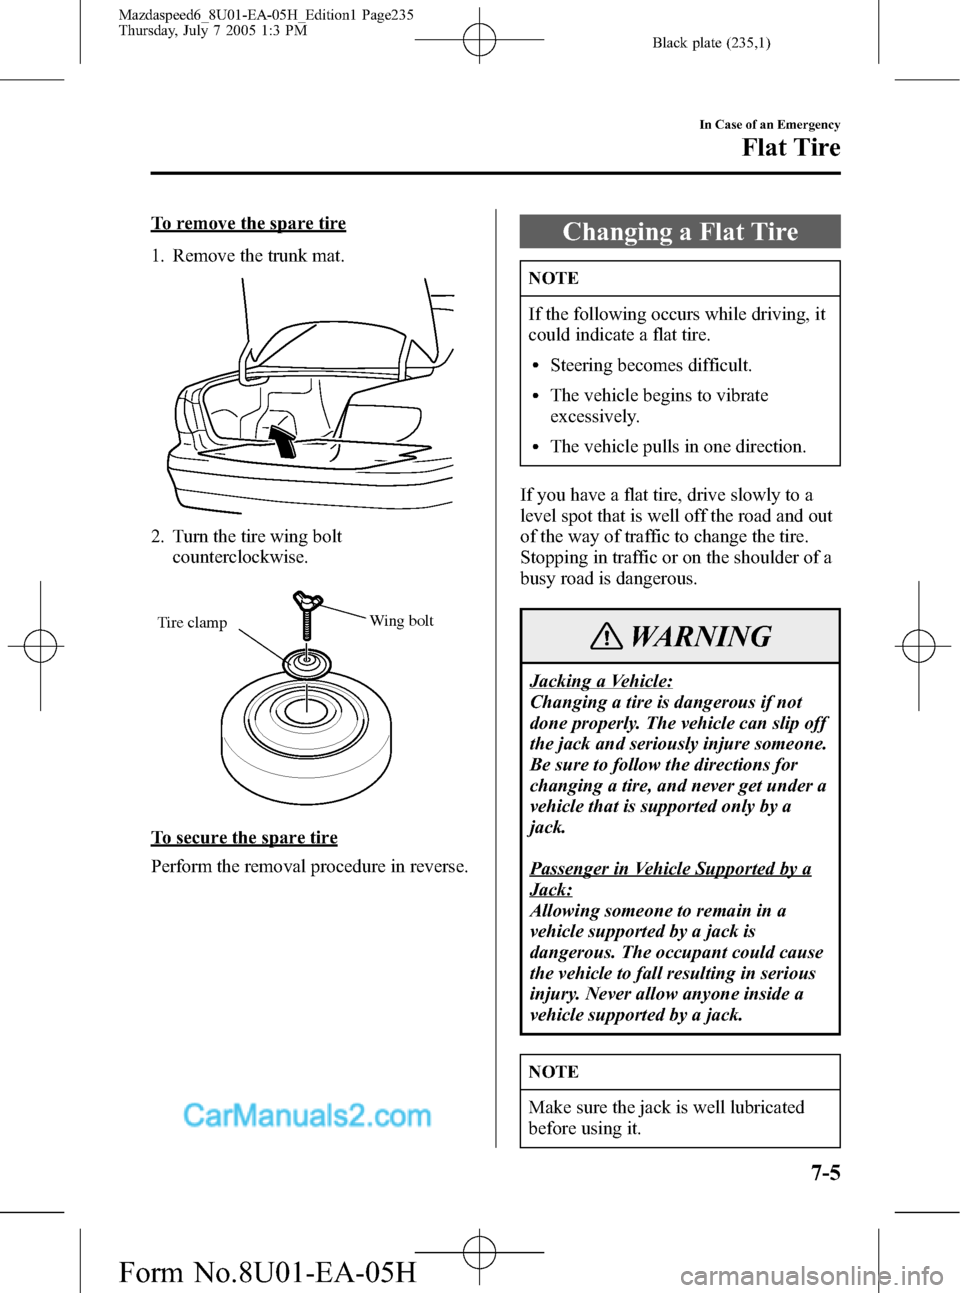 MAZDA MODEL MAZDASPEED 6 2006  Owners Manual (in English) Black plate (235,1)
To remove the spare tire
1. Remove the trunk mat.
2. Turn the tire wing bolt
counterclockwise.
Wing bolt
Tire clamp
To secure the spare tire
Perform the removal procedure in revers